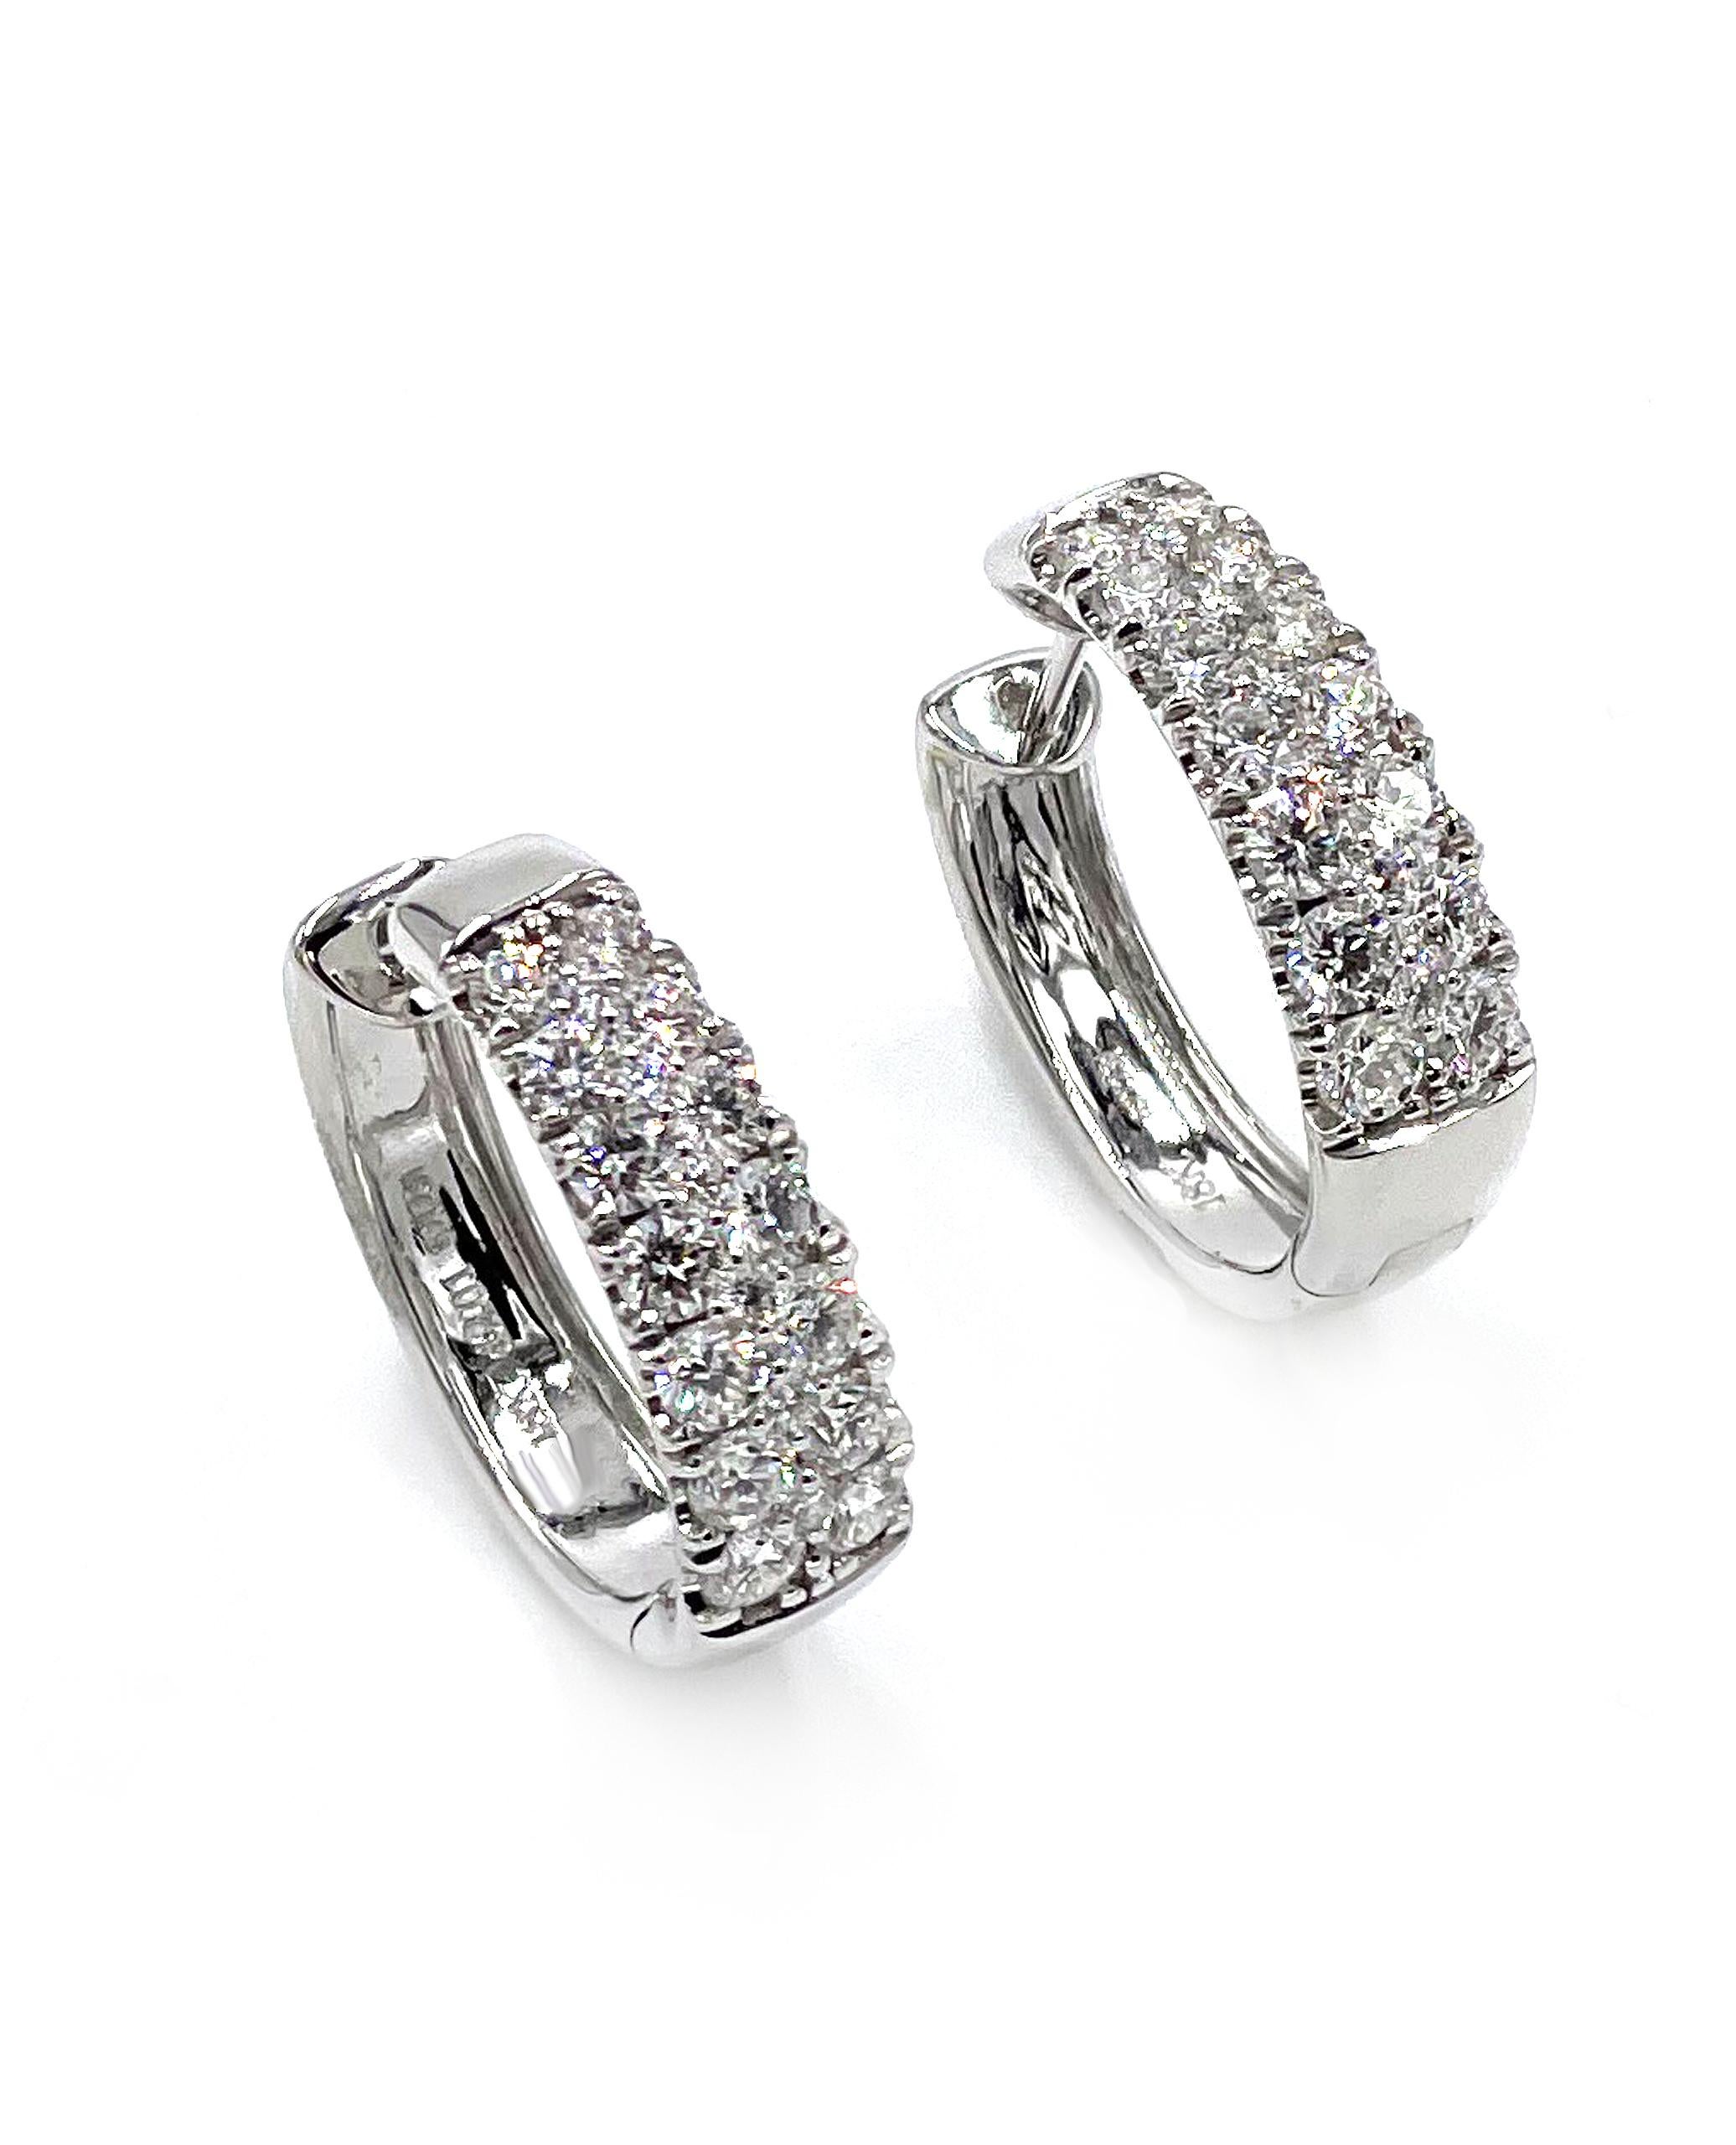 Simon G. 18K white gold hoop earrings with 40 round brilliant-cut pave set diamonds totaling 2.01 carats.

* Style No. LE4391
* Diamonds are G color, VS2/SI1 clarity
